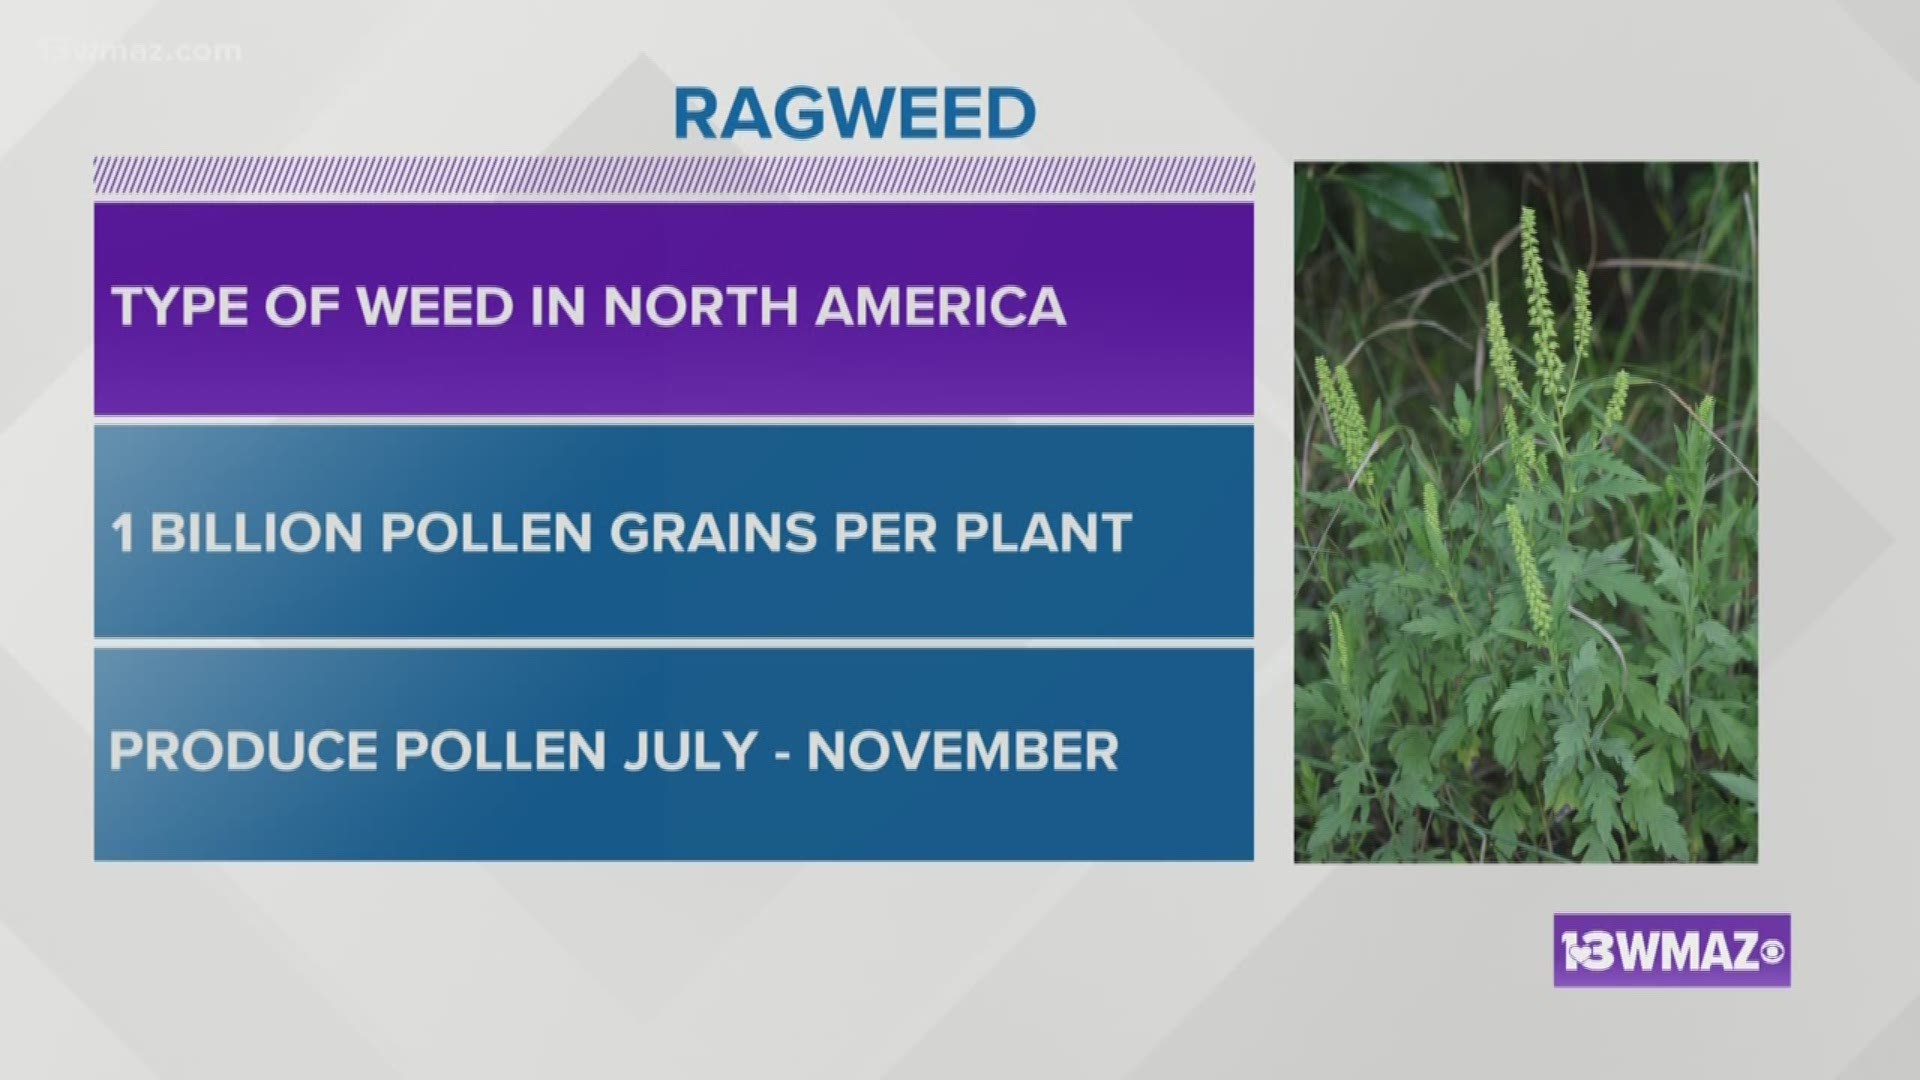 We are getting toward the end of October, which means we are deep into fall allergy season. Austin Chaney talks about ragweed and allergies.